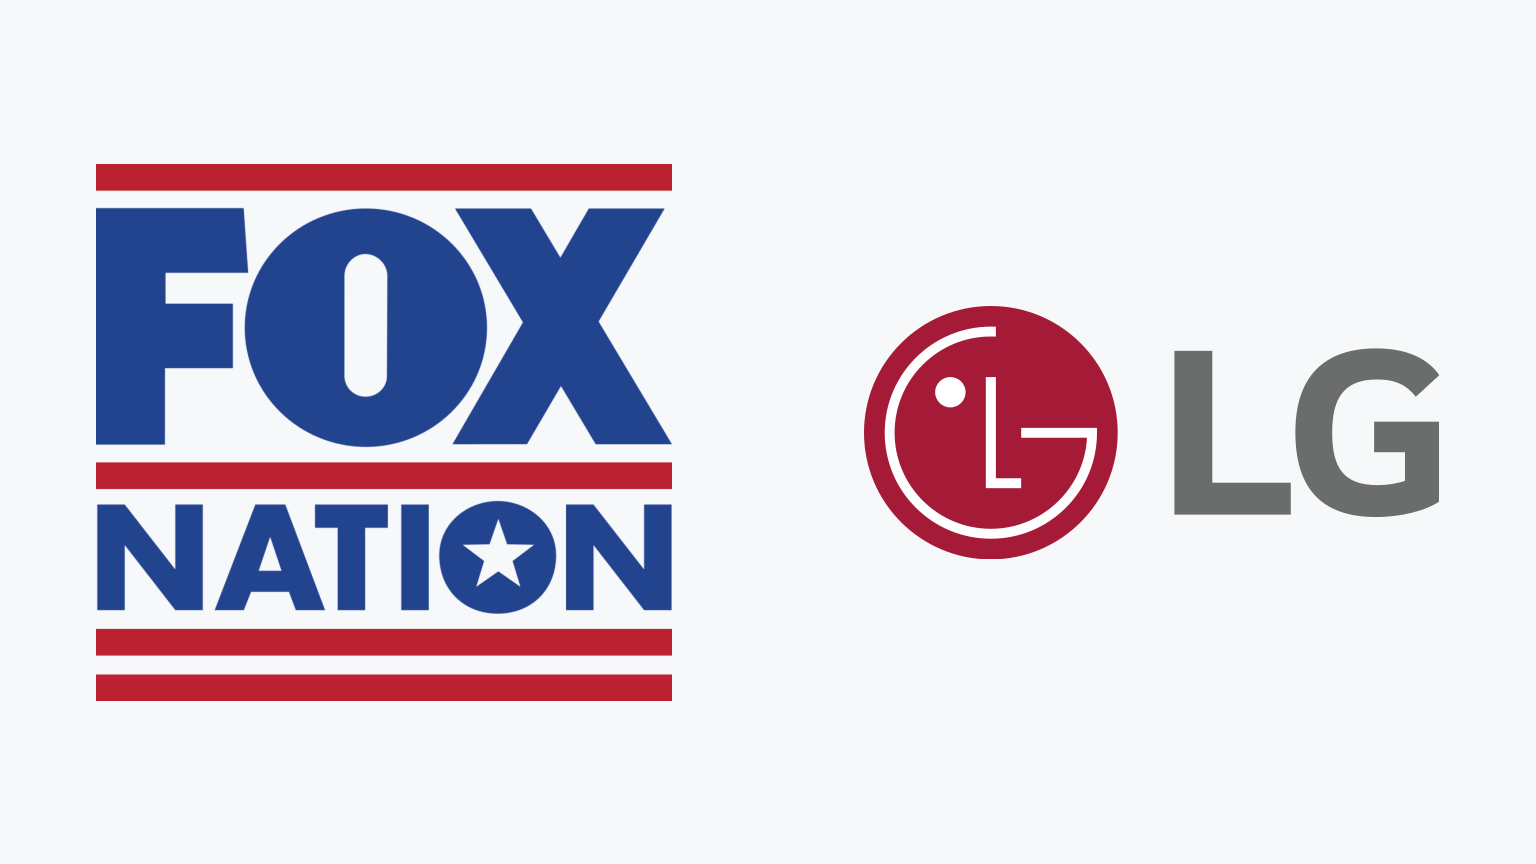 How To Download Fox Nation App On LG Smart TV